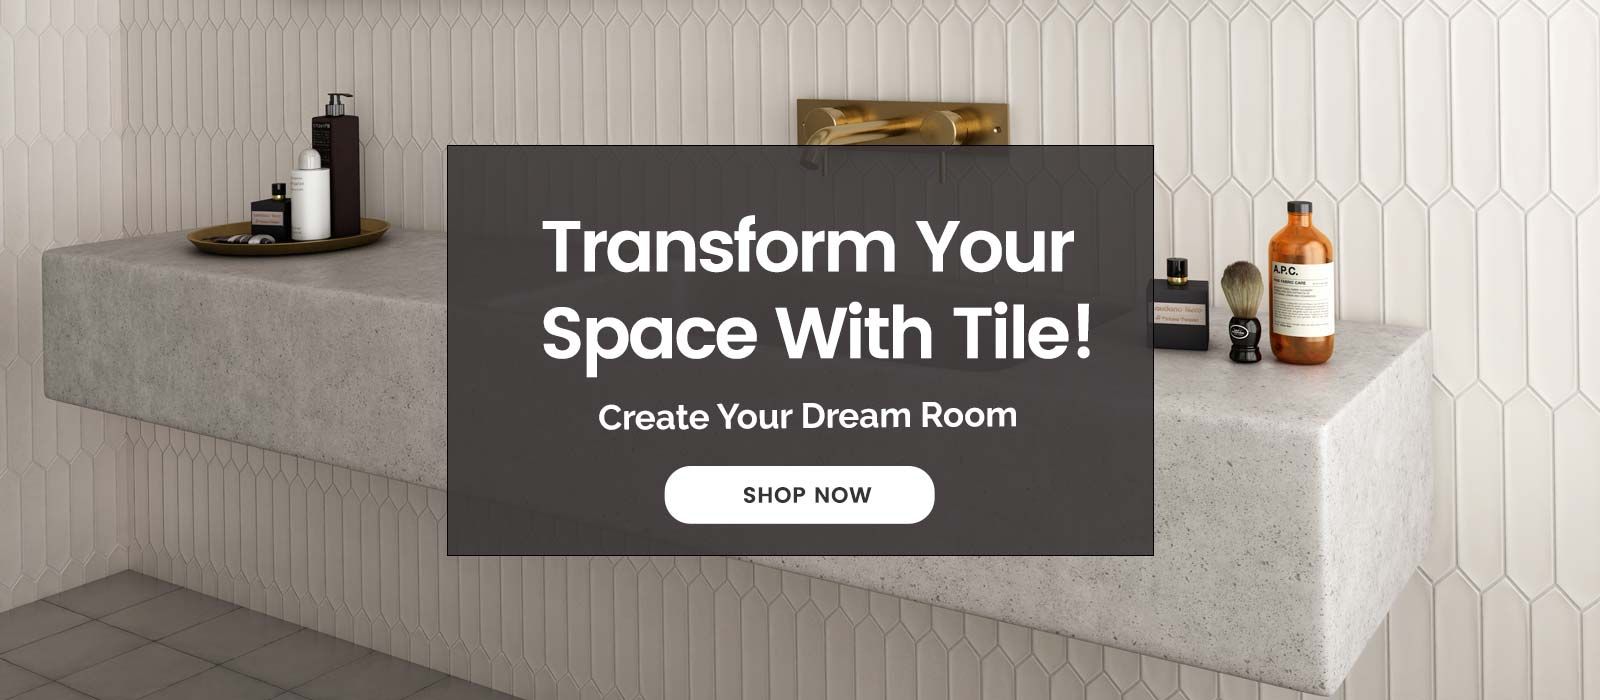 Transform Your Space With Tile! Create Your Dream Room. Shop Now!